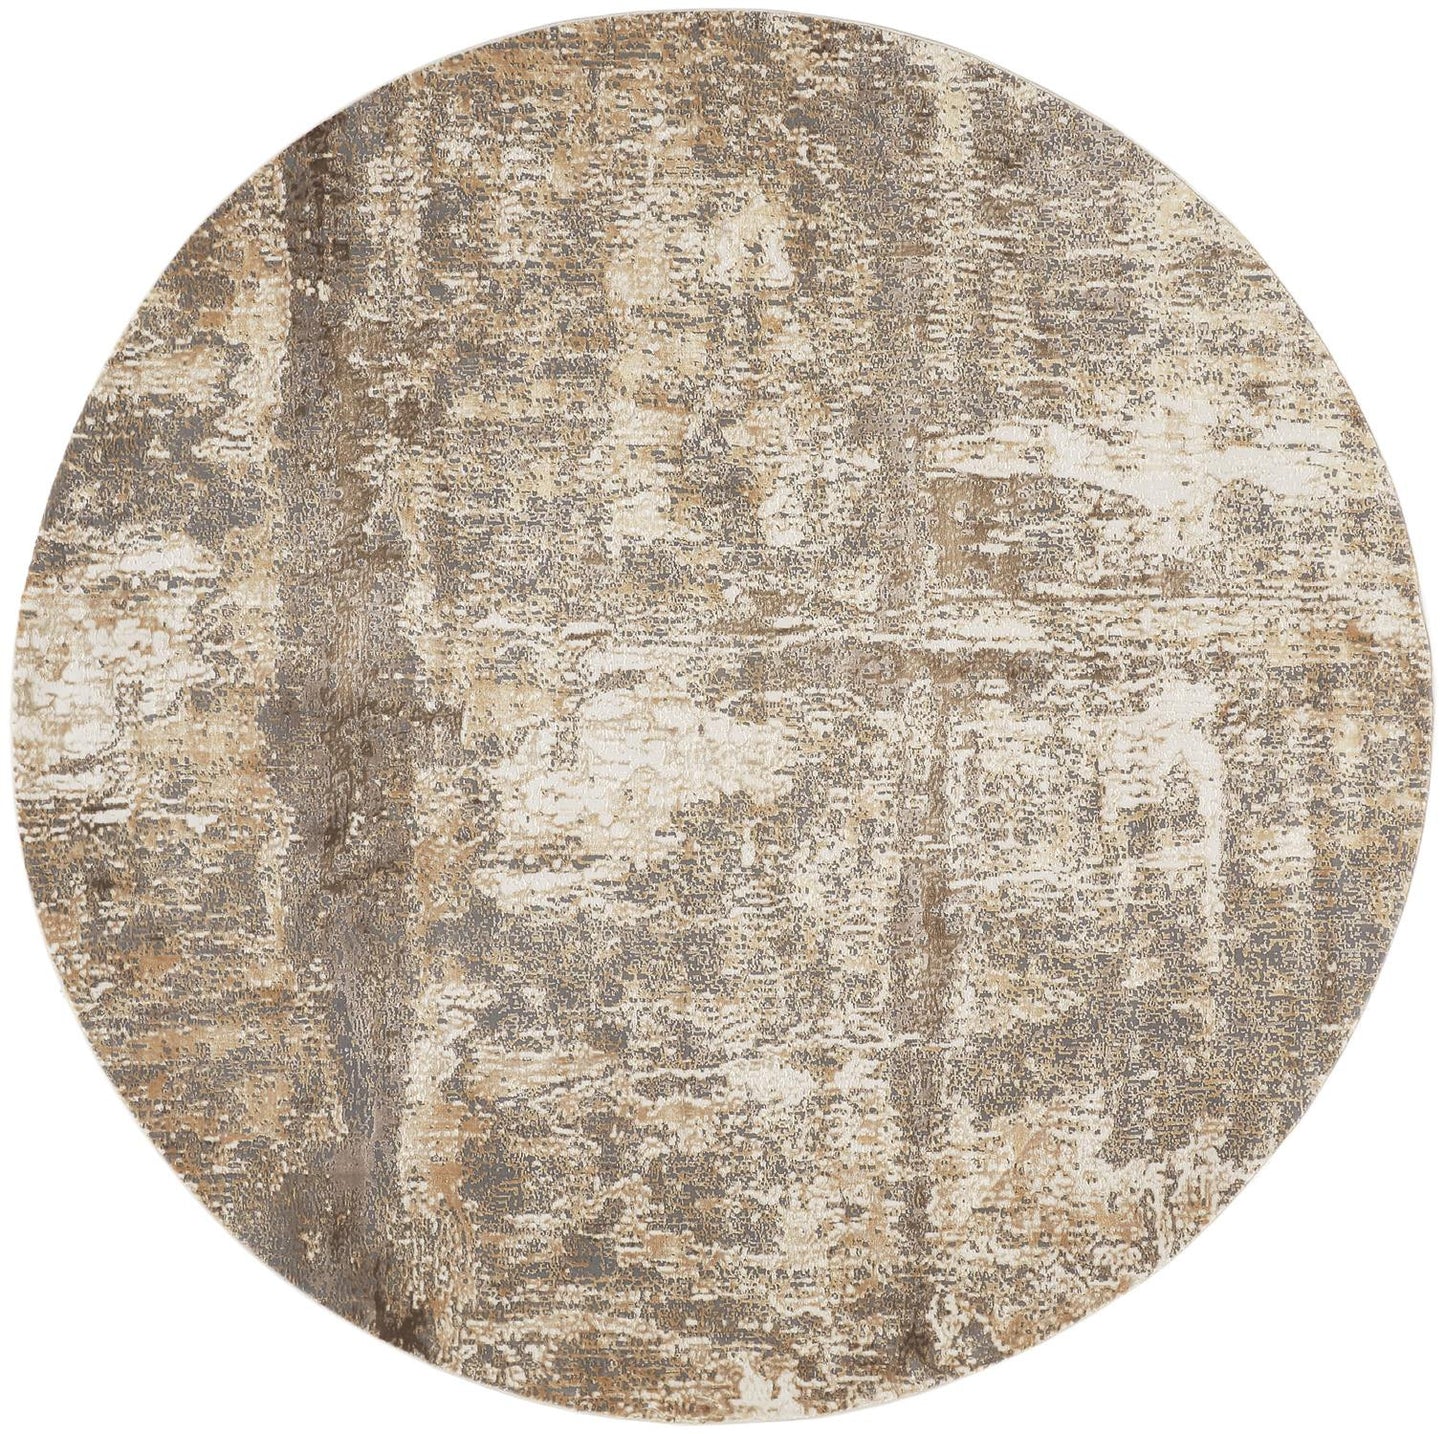 9' X 12' Tan Ivory And Brown Abstract Area Rug